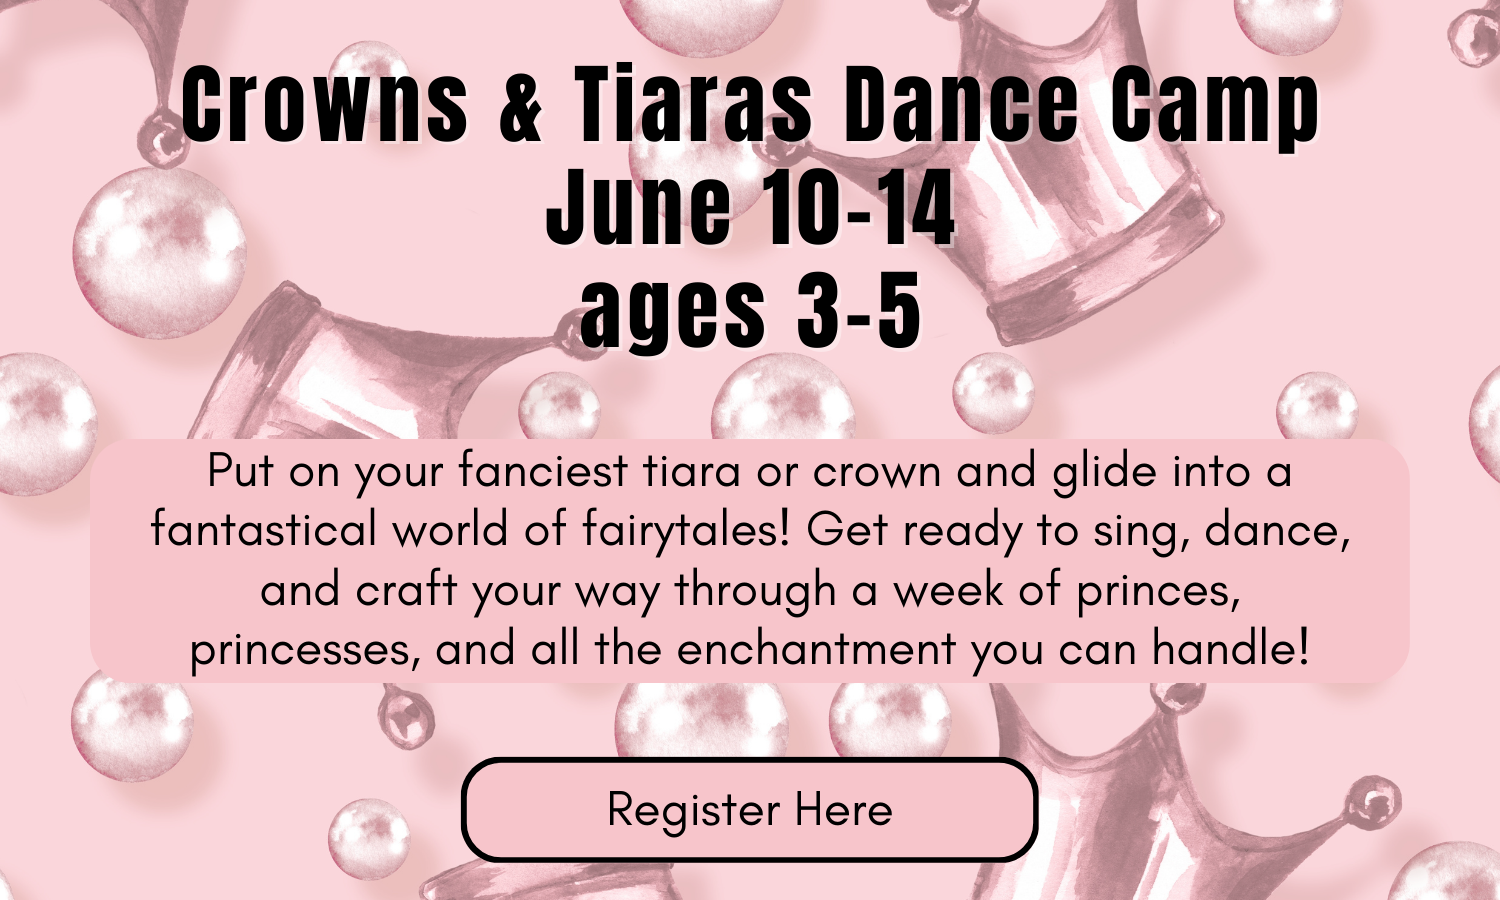 camp descriptions for web crowns and tiaras.png